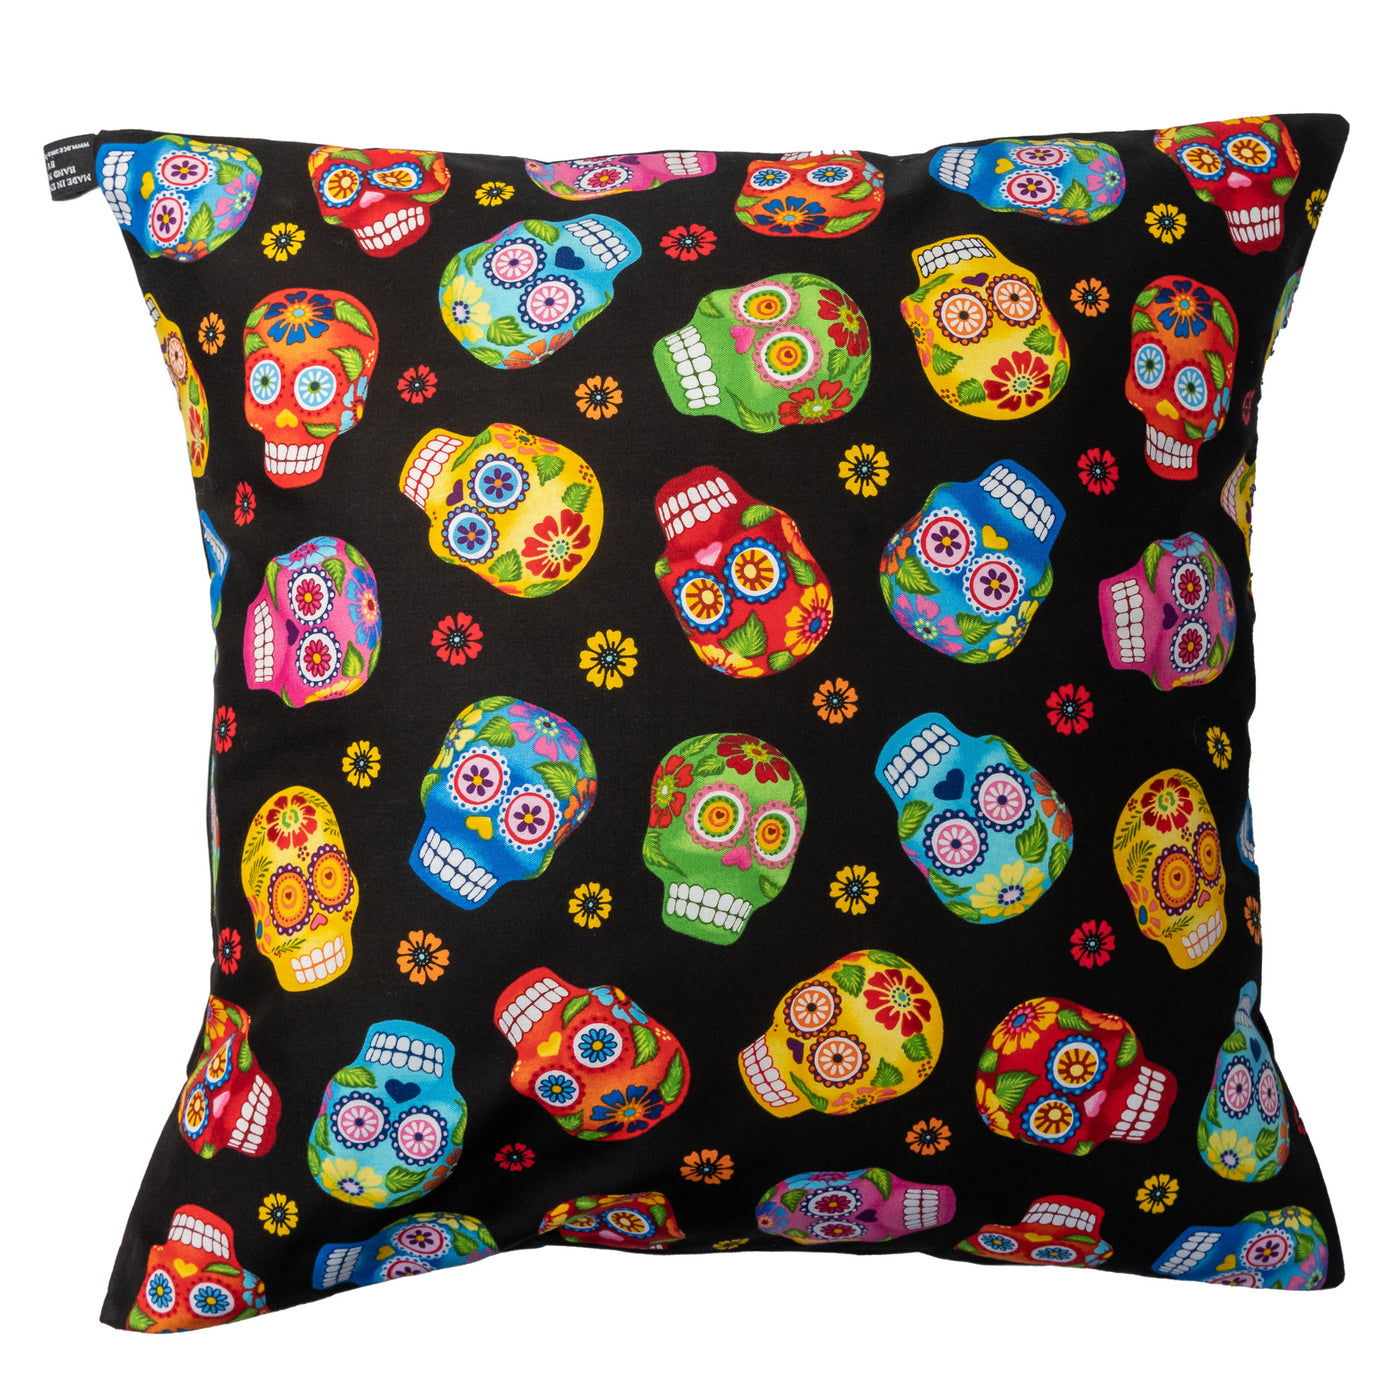 Bright Candy Skull Cushion Cover - 100% Cotton